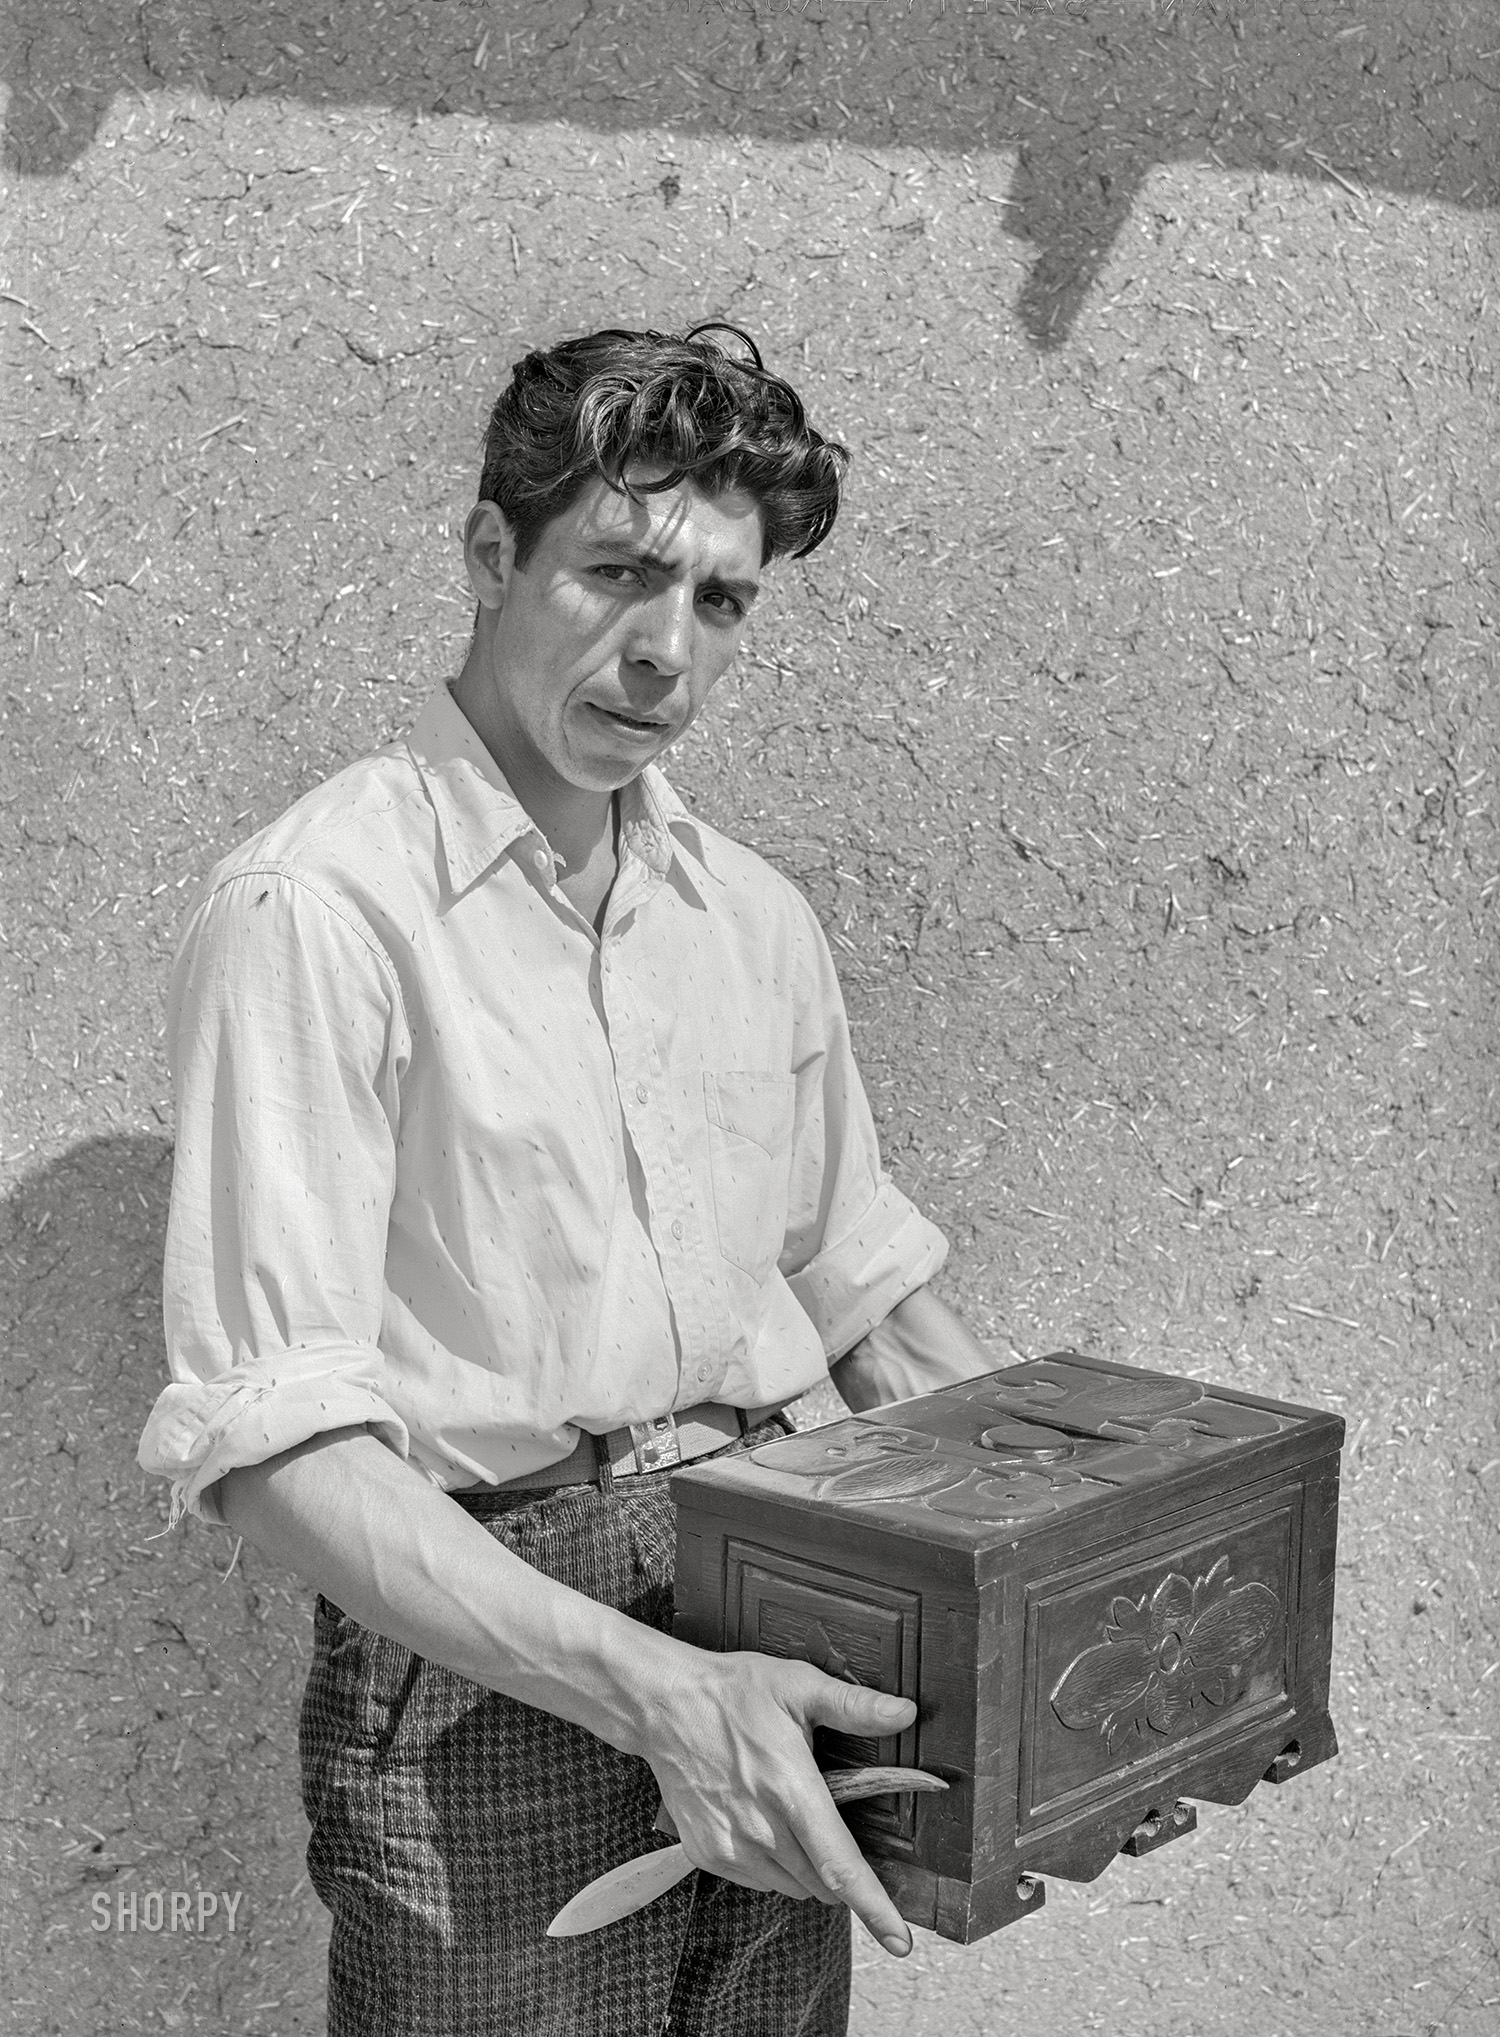 July 1940. "Chamisal, New Mexico. Spanish-American boy with chest which he carved. These people are adept in many of the handcrafts." Acetate negative by Russell Lee. View full size.